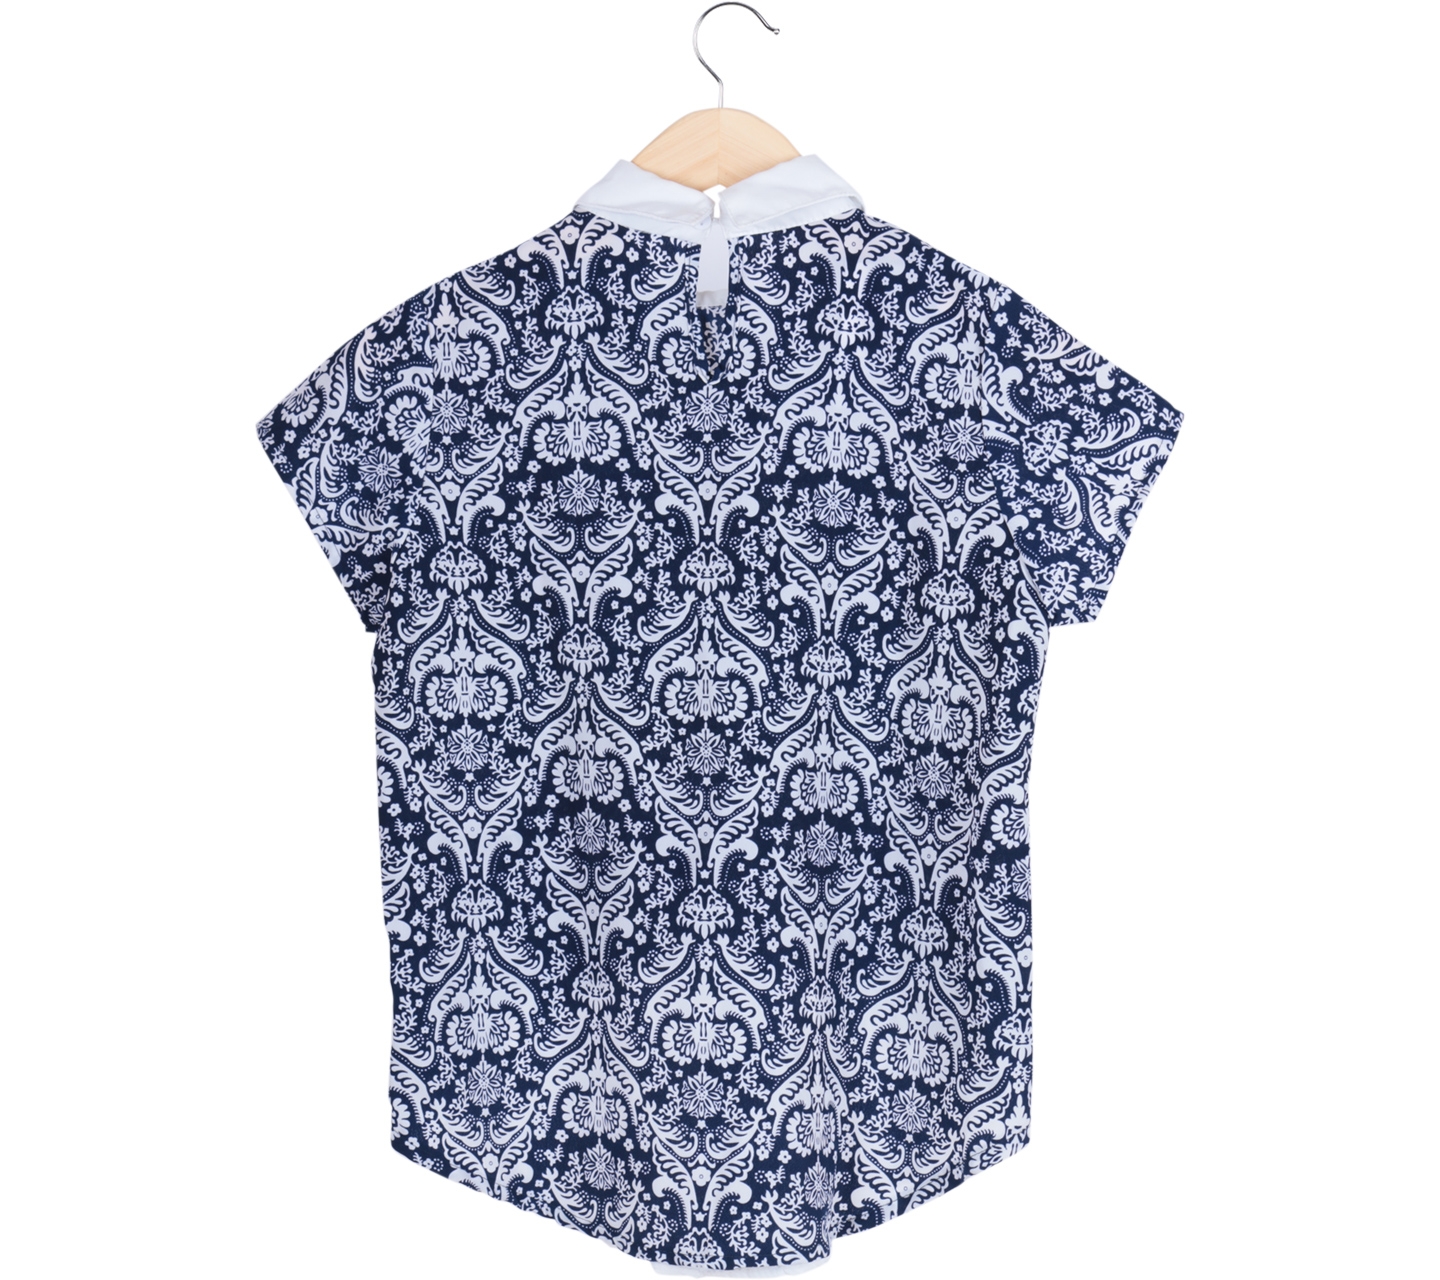  Blue And White Combi Shirt